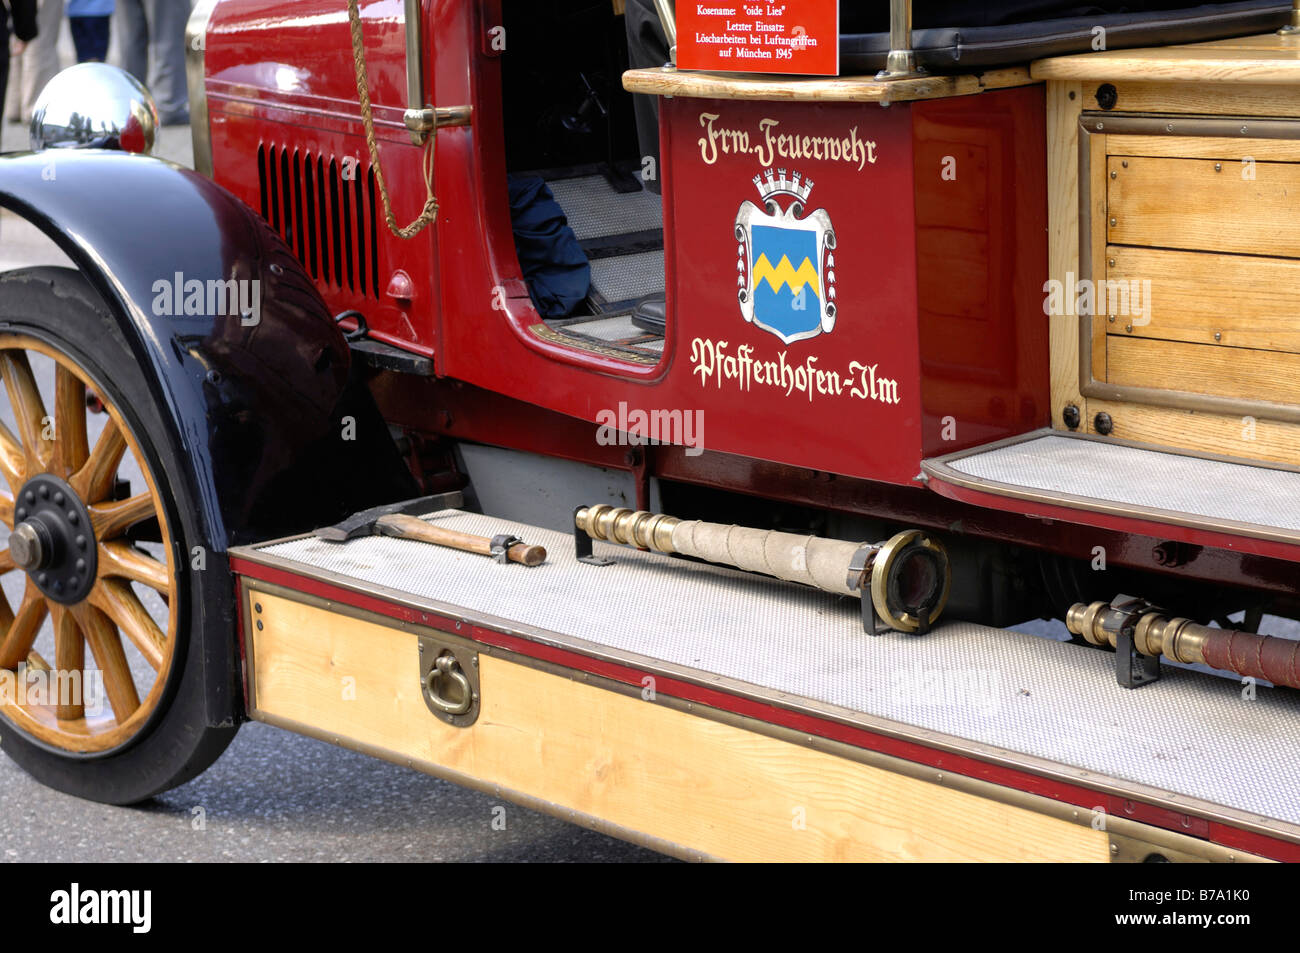 Fire brigade nostalgia, old fire engine, in detail Stock Photo